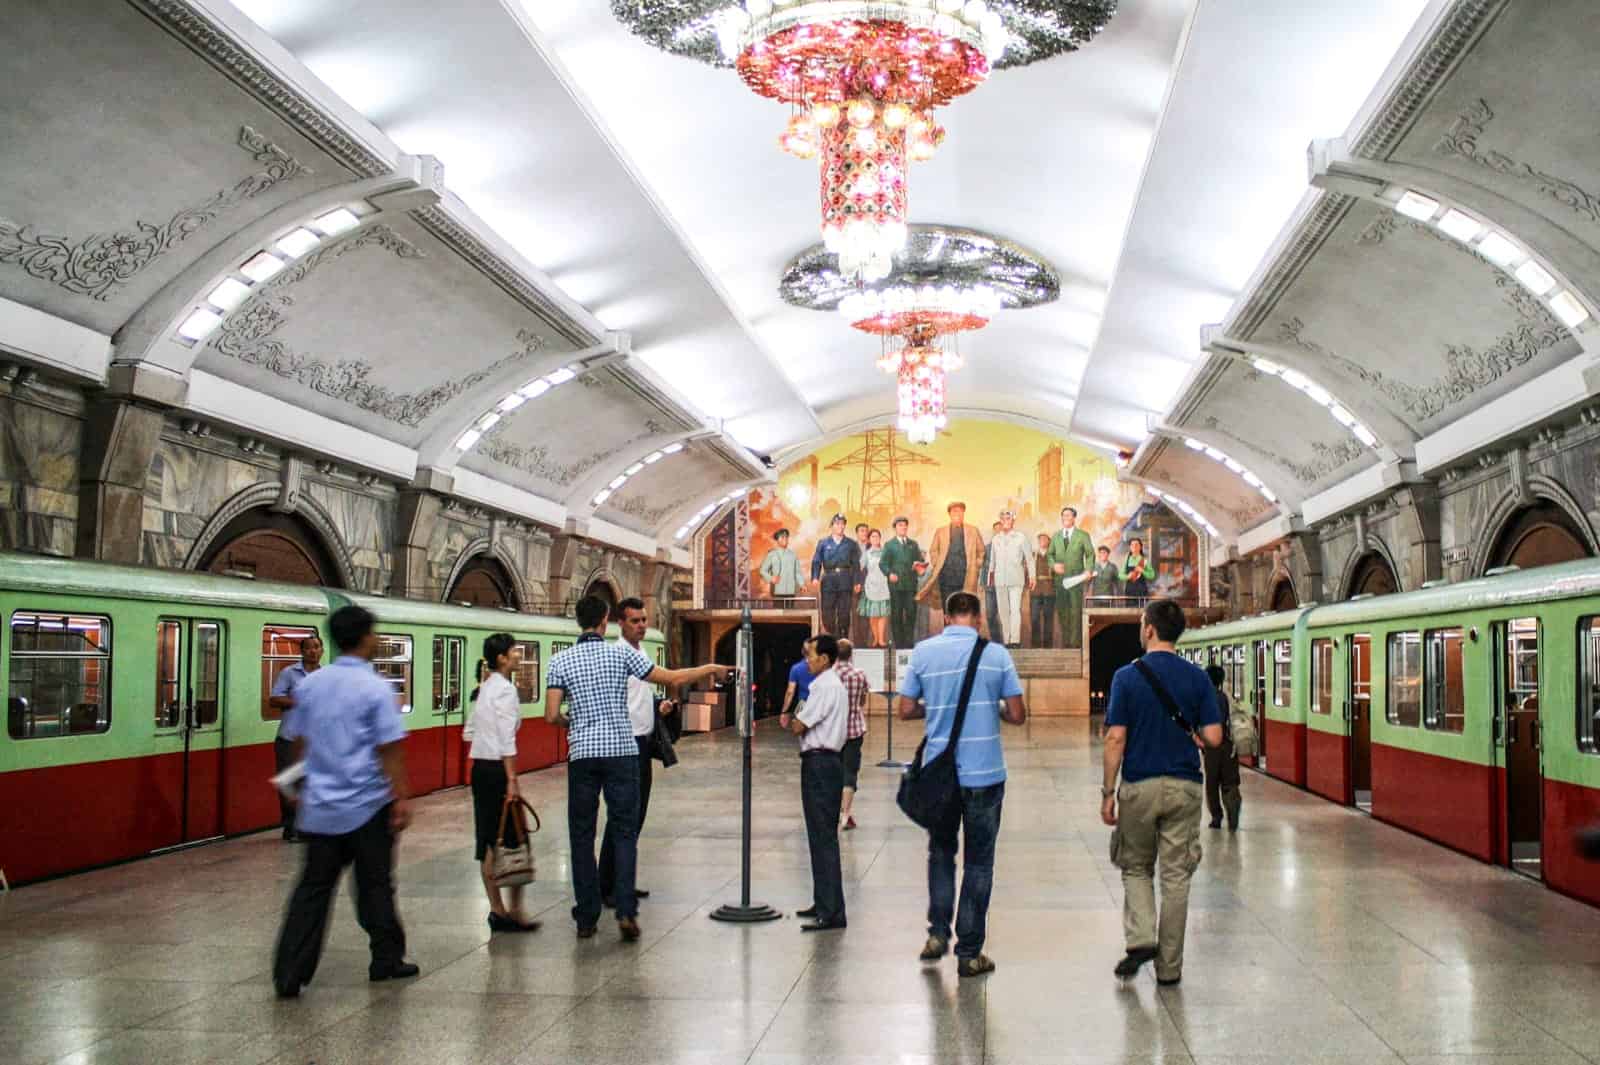 The metro in Pyongyang, North Korea that is open to tourists 